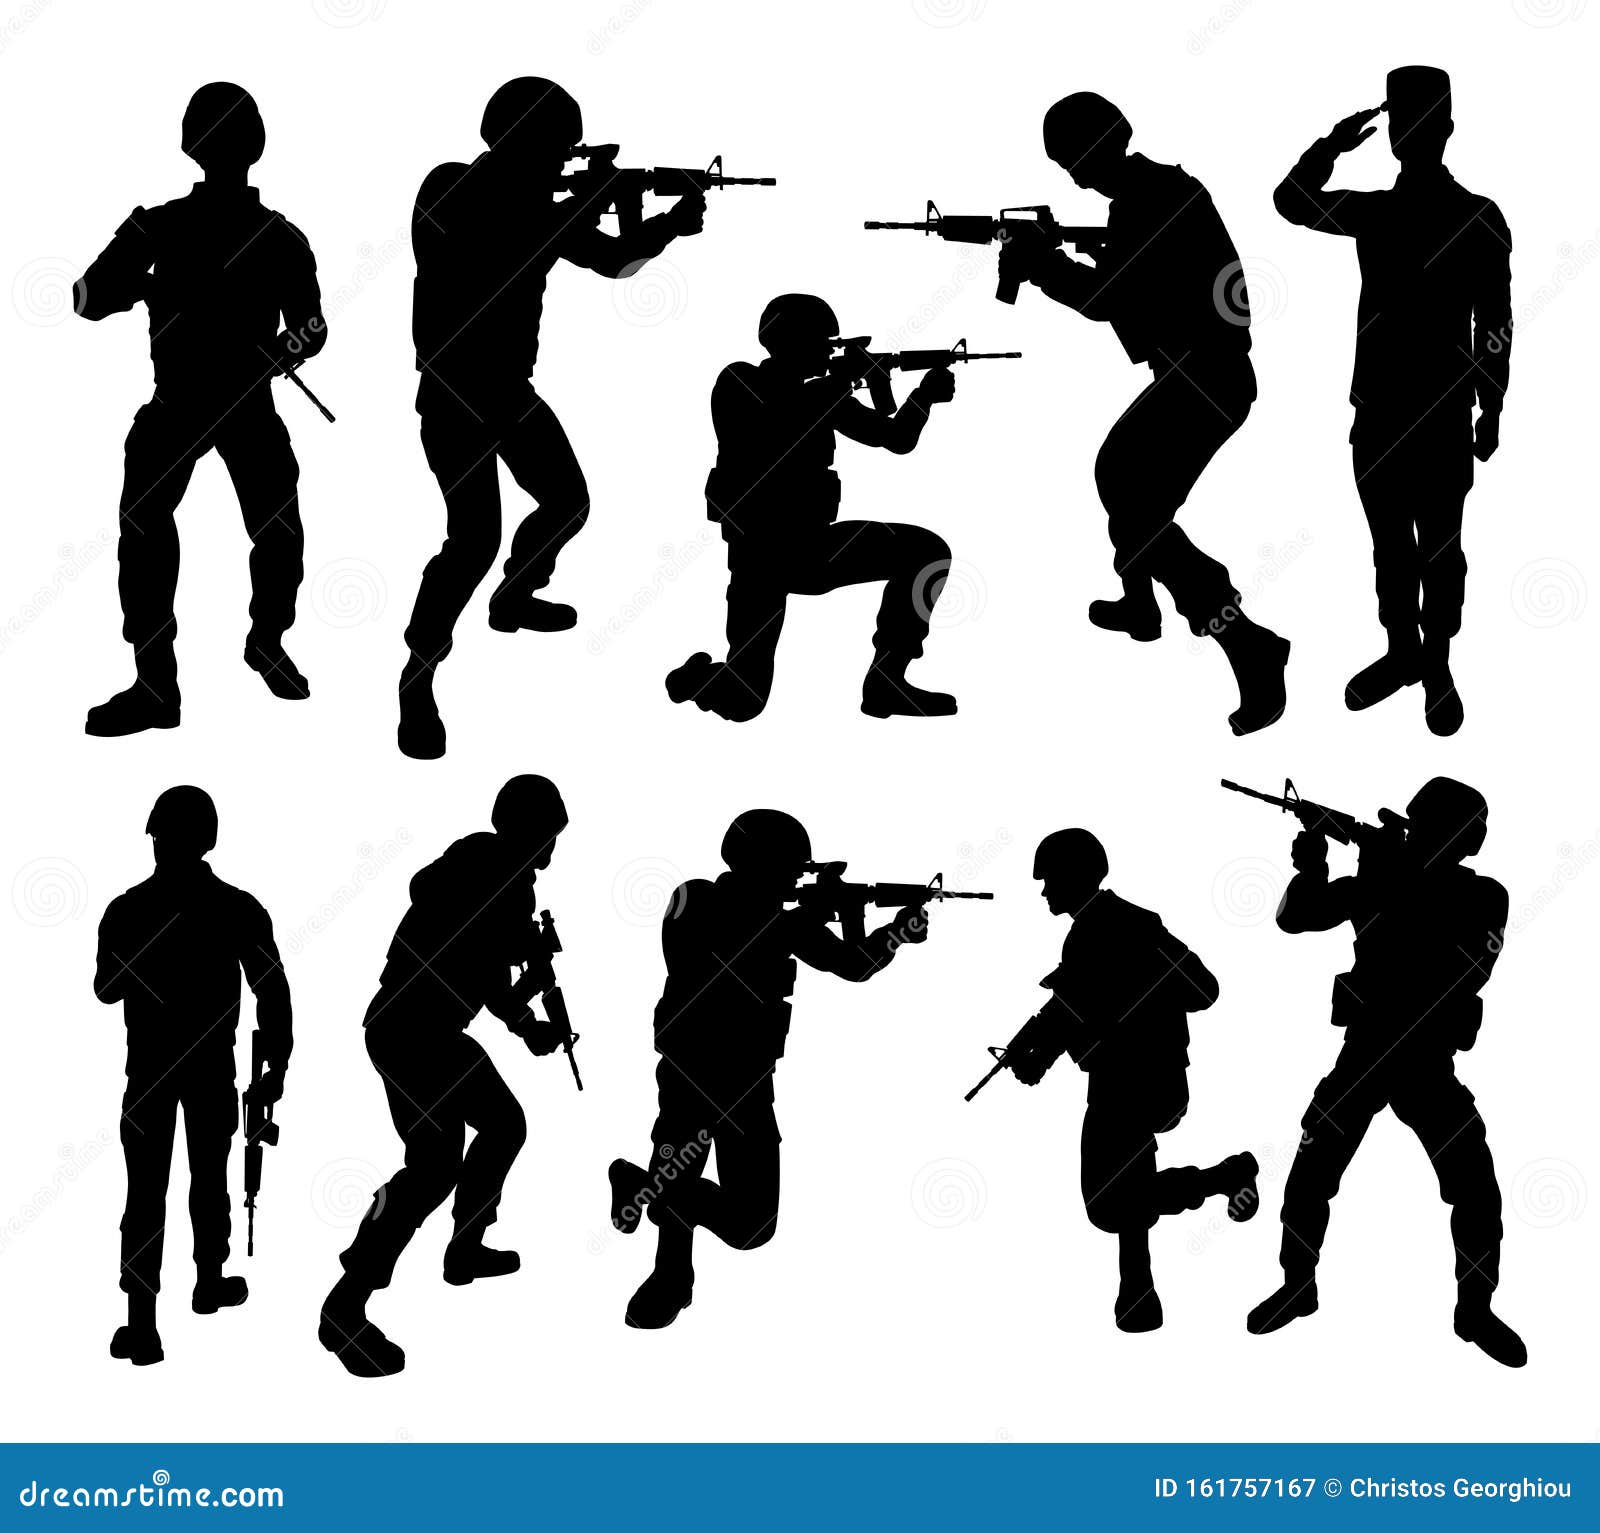 Soldier High Quality Silhouettes Stock Vector - Illustration of ...